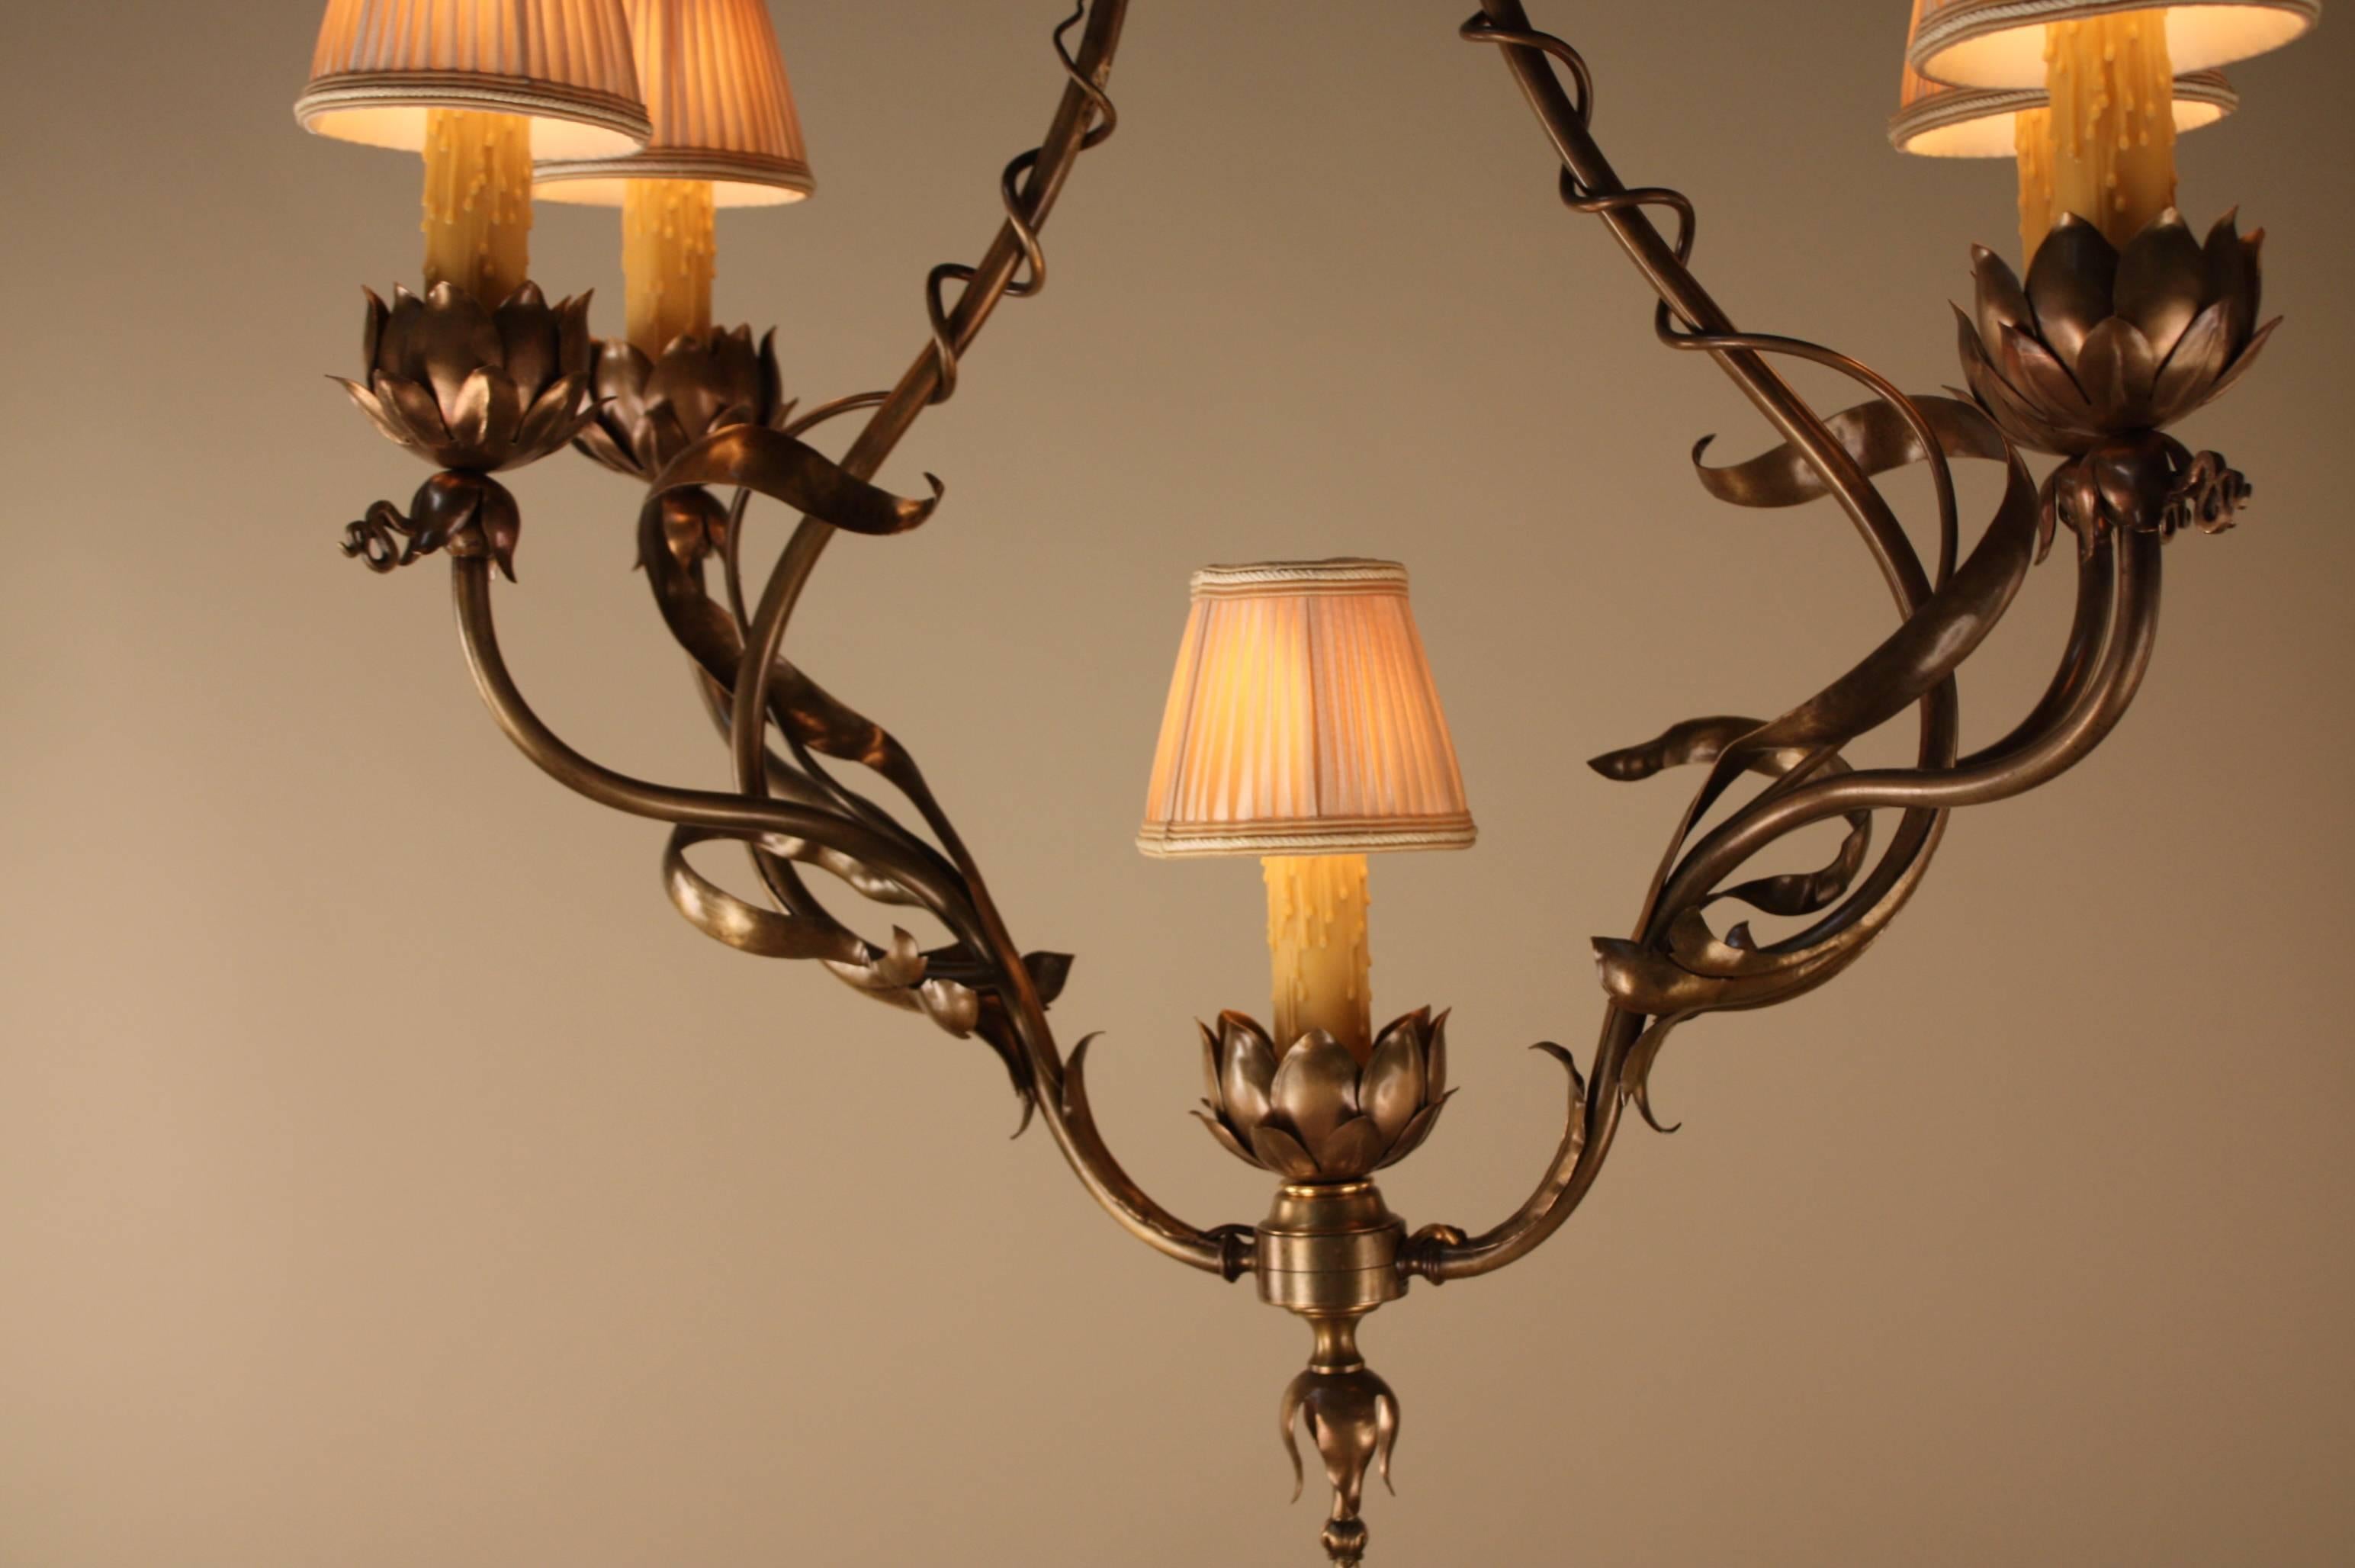 Fantastic electrified gas five-light French 19th century bronze Art Nouveau chandelier and fitted with pleated silk lampshades.
The measurement below is without lampshade.